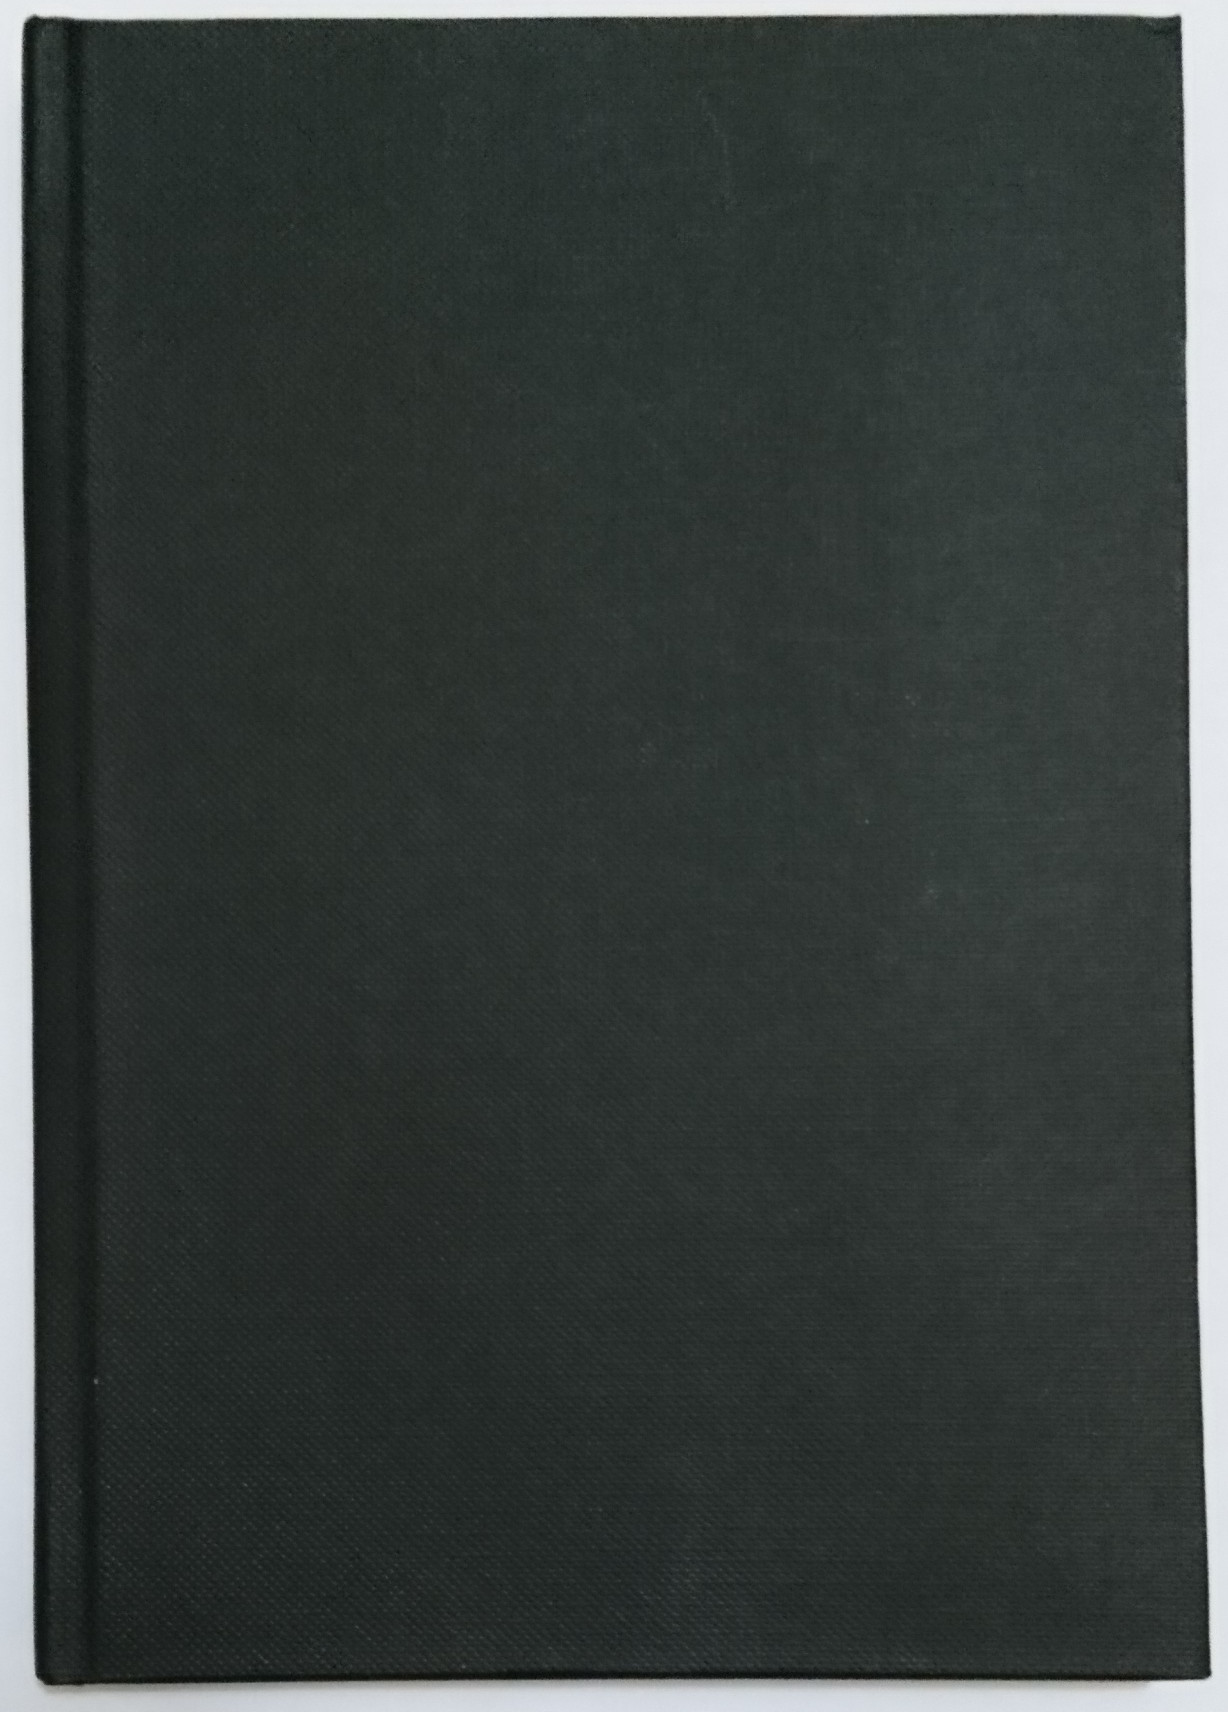 Photo of the book